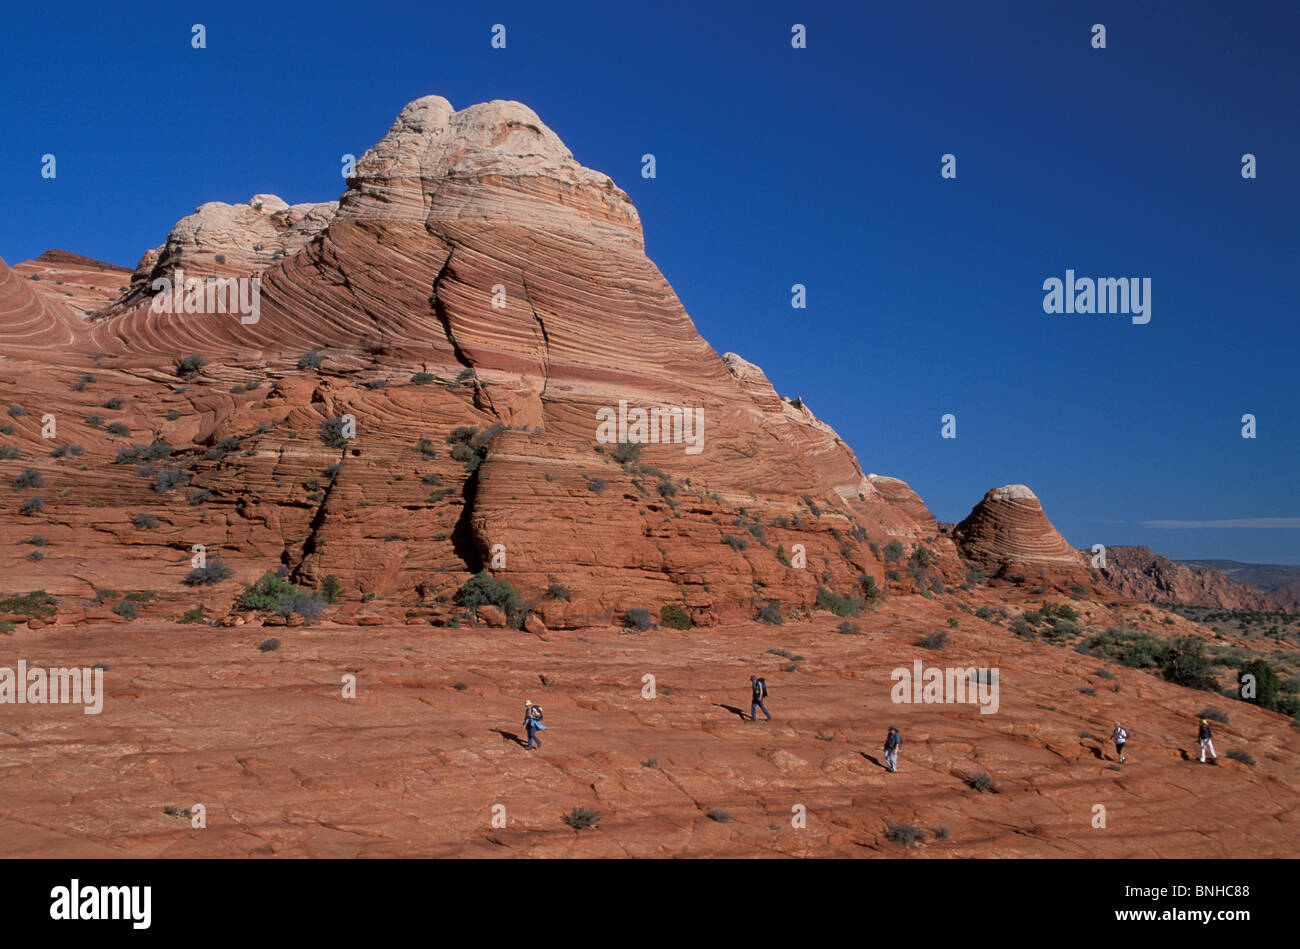 Usa Kanab Utah Cojote Buttes Grand Staircase Escalante National Monument Group People Hiker Hiking Trekking Nature Landscape Stock Photo